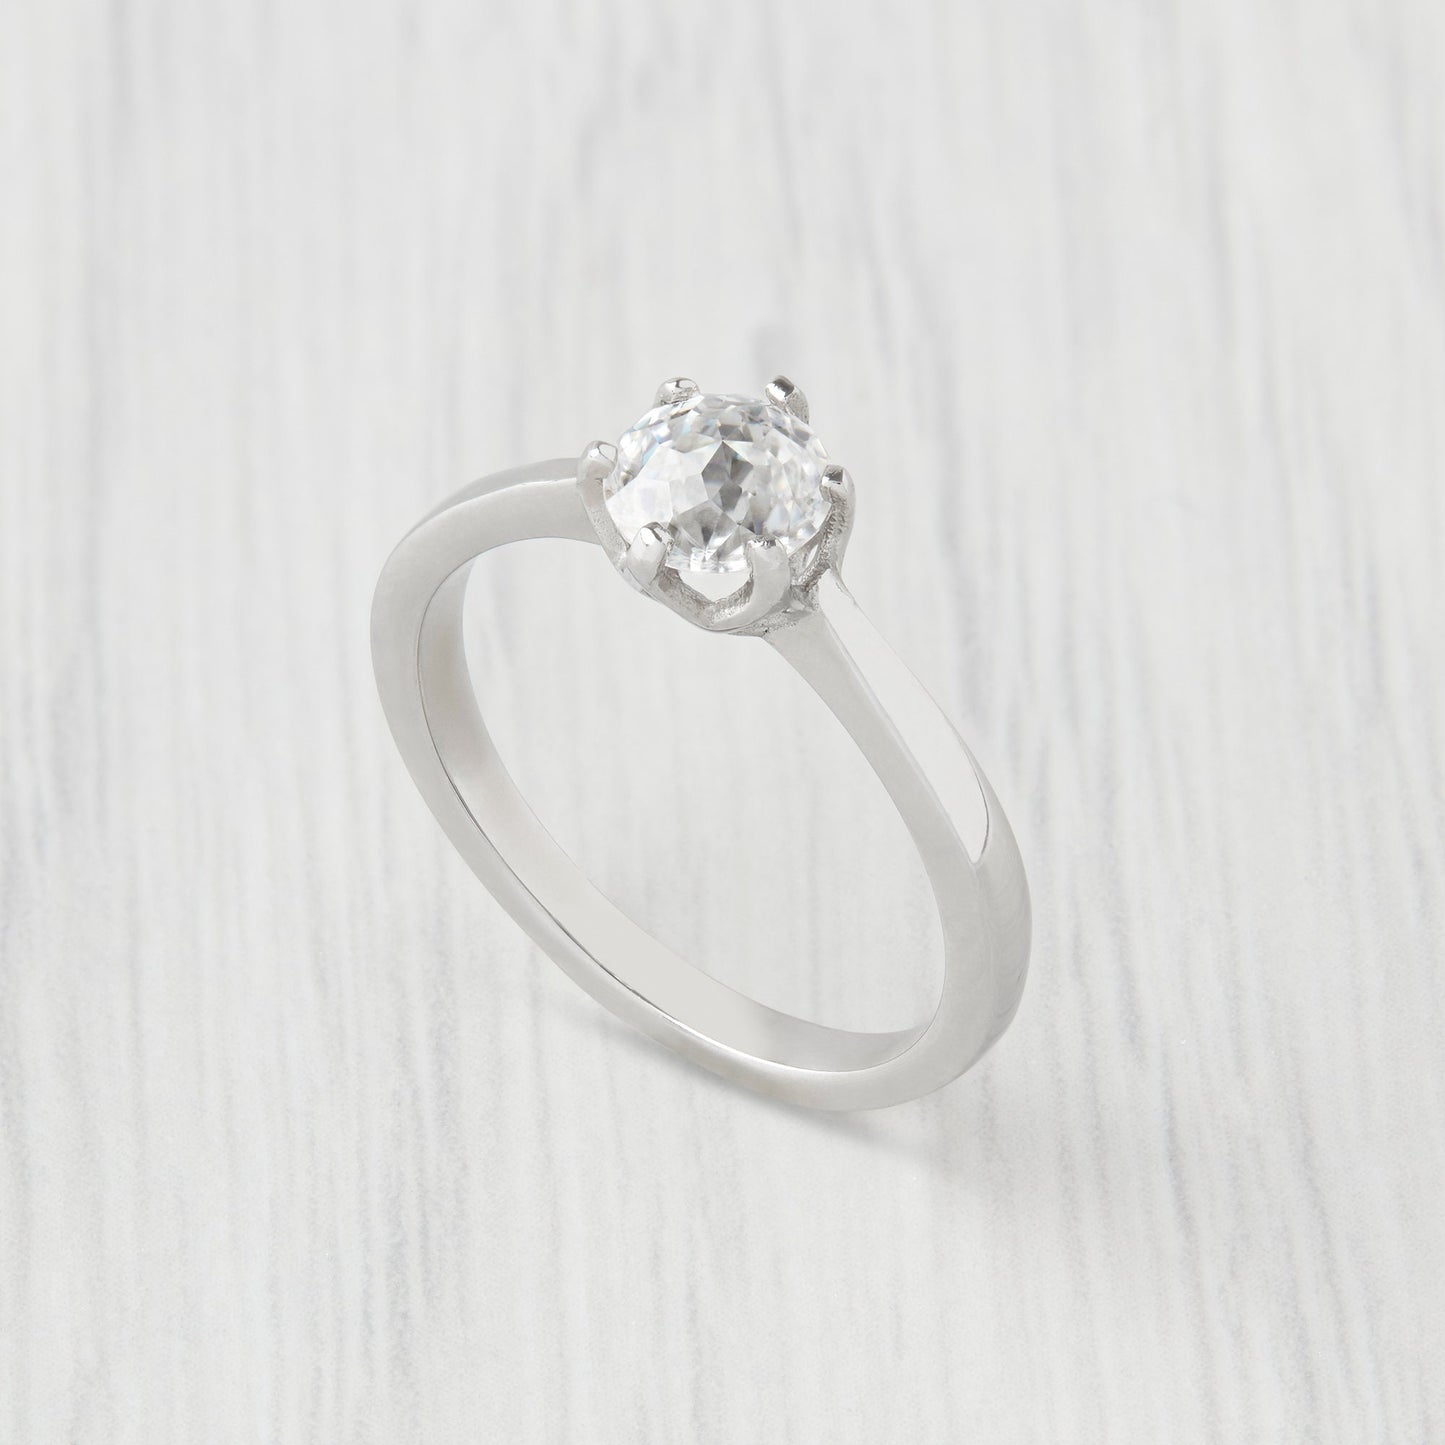 Jubilee Cut 1ct Moissanite Solitaire ring available in white gold or titanium - engagement ring - hand made